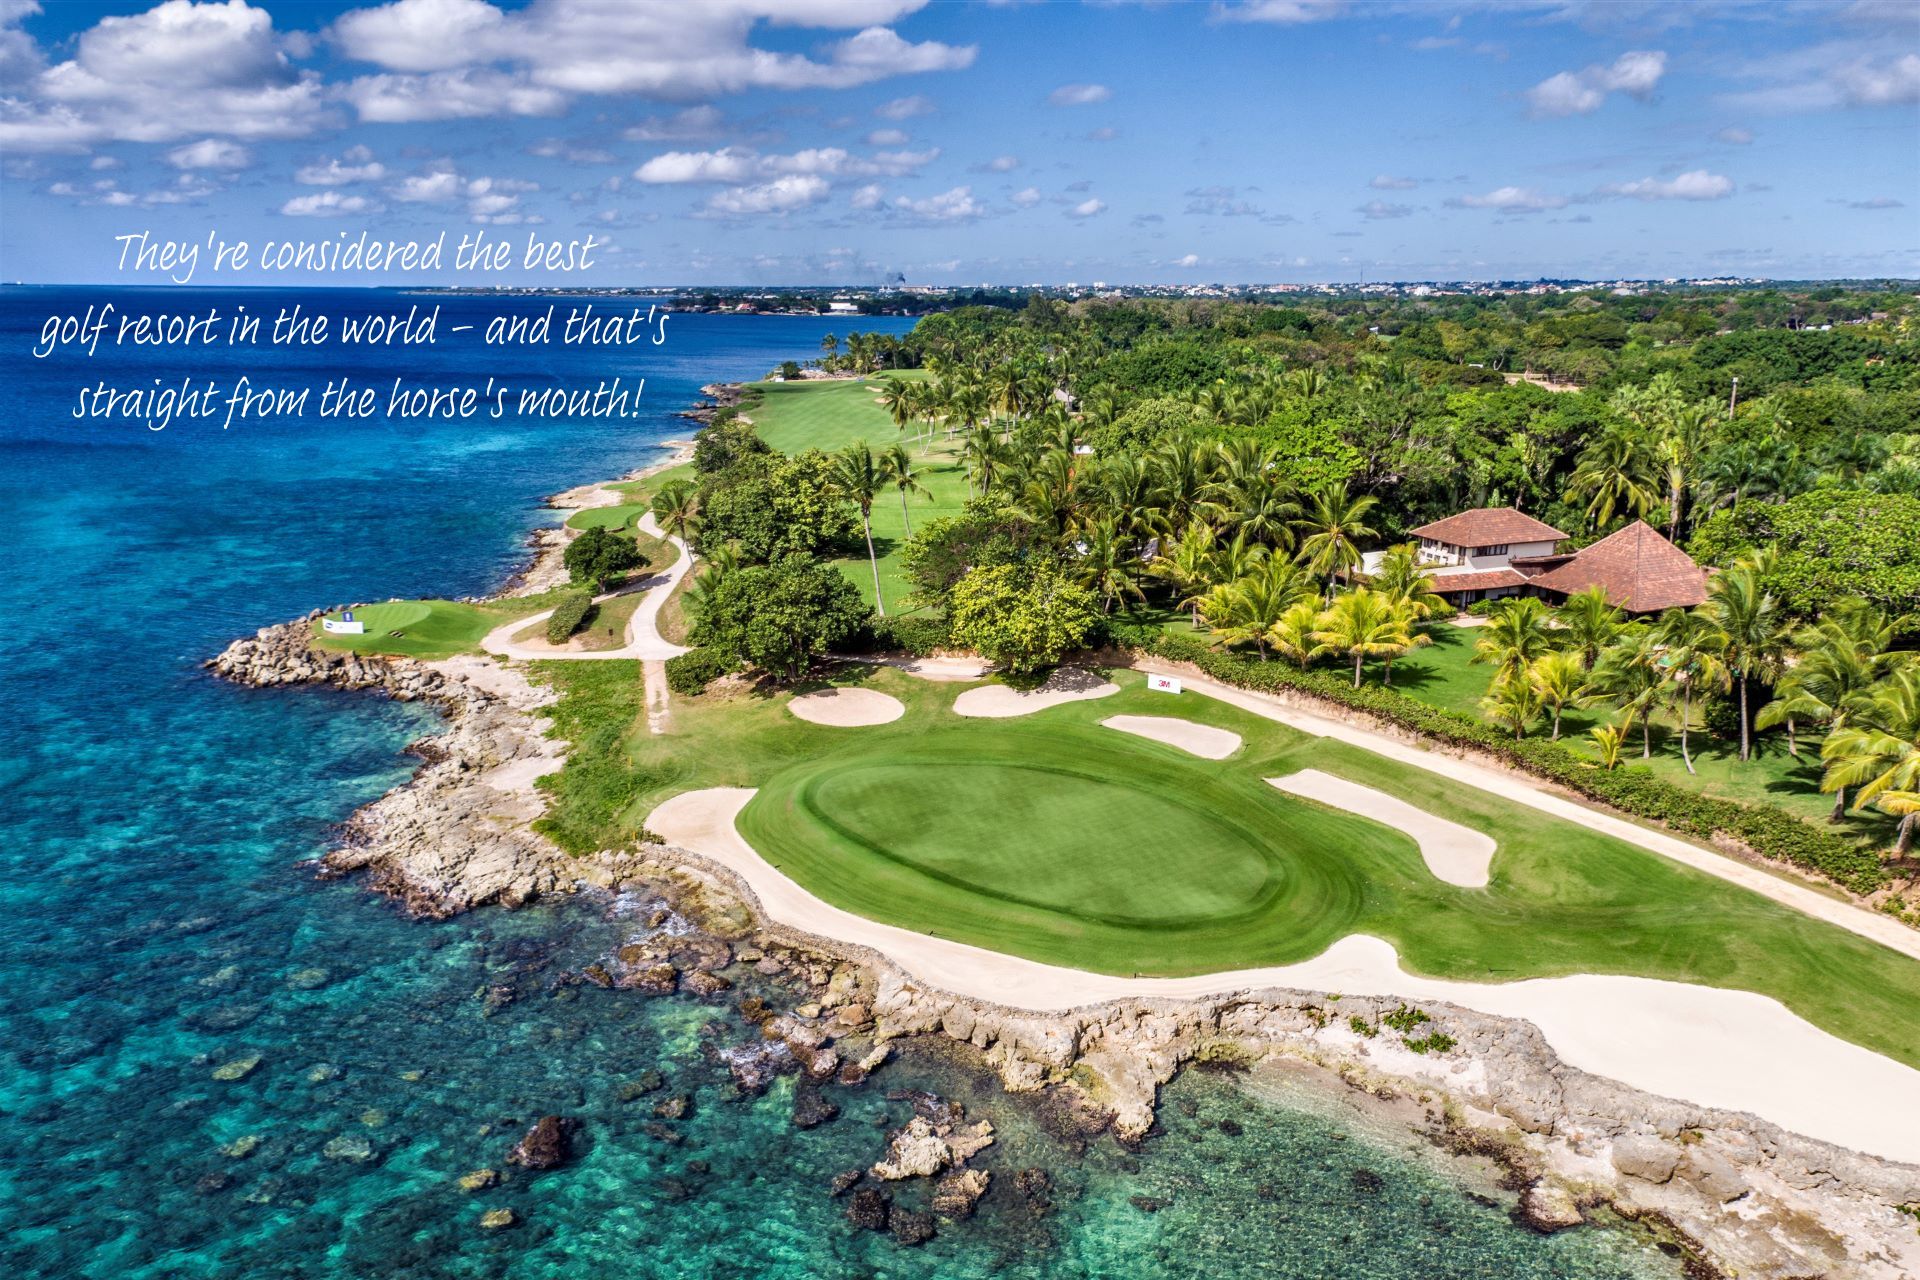 The golf course at Casa de Campo, considered the best golf resort in the world.